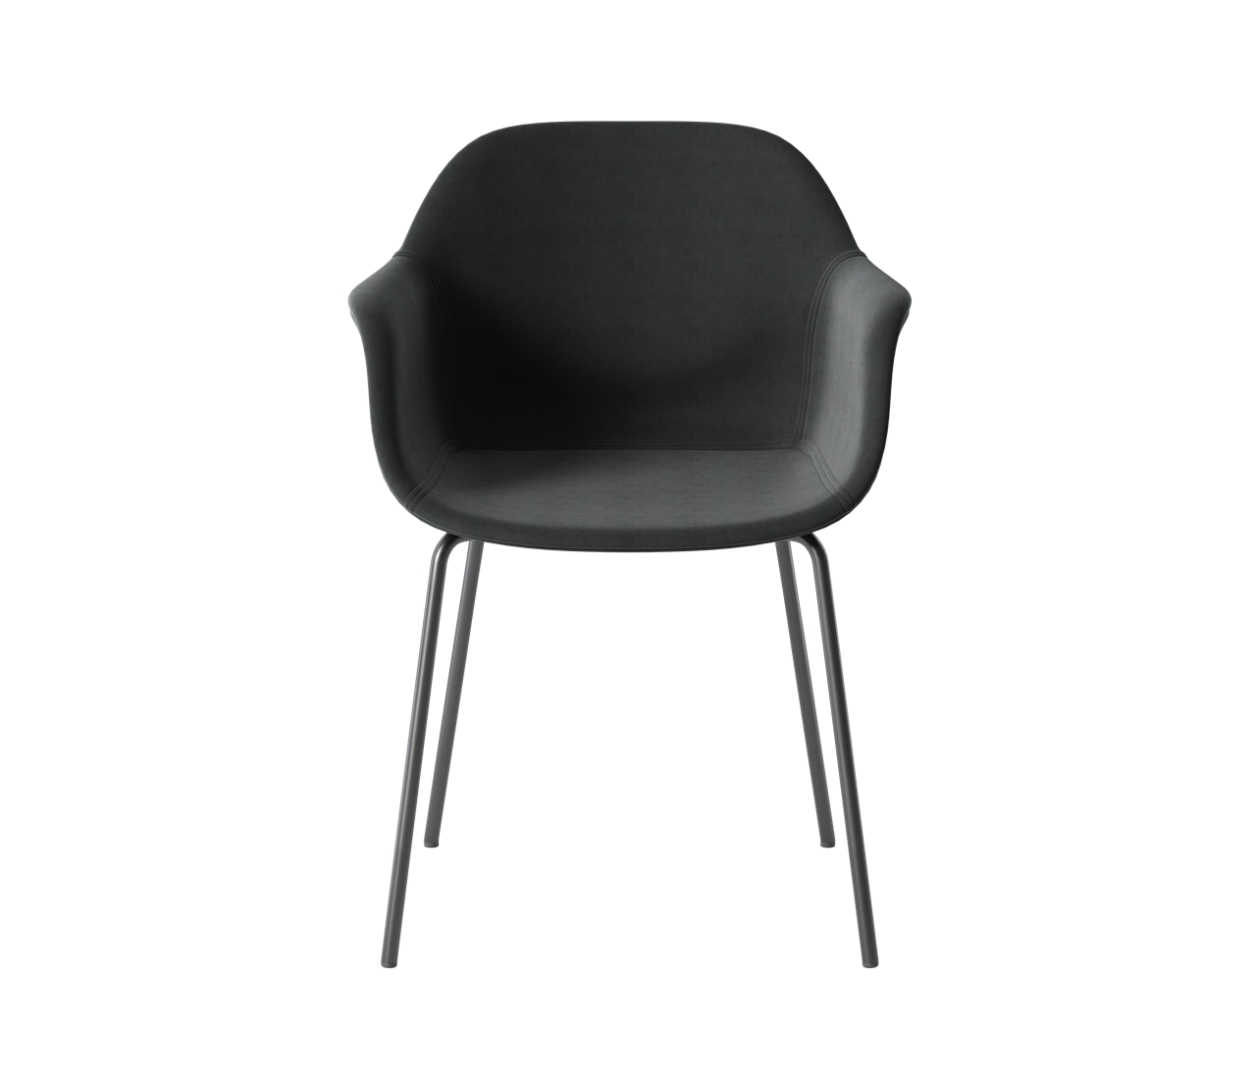 OCEE&FOUR – Chairs – FourMe 44 – Plastic Shell - Inner Upholstery - Packshot Image 4 Large